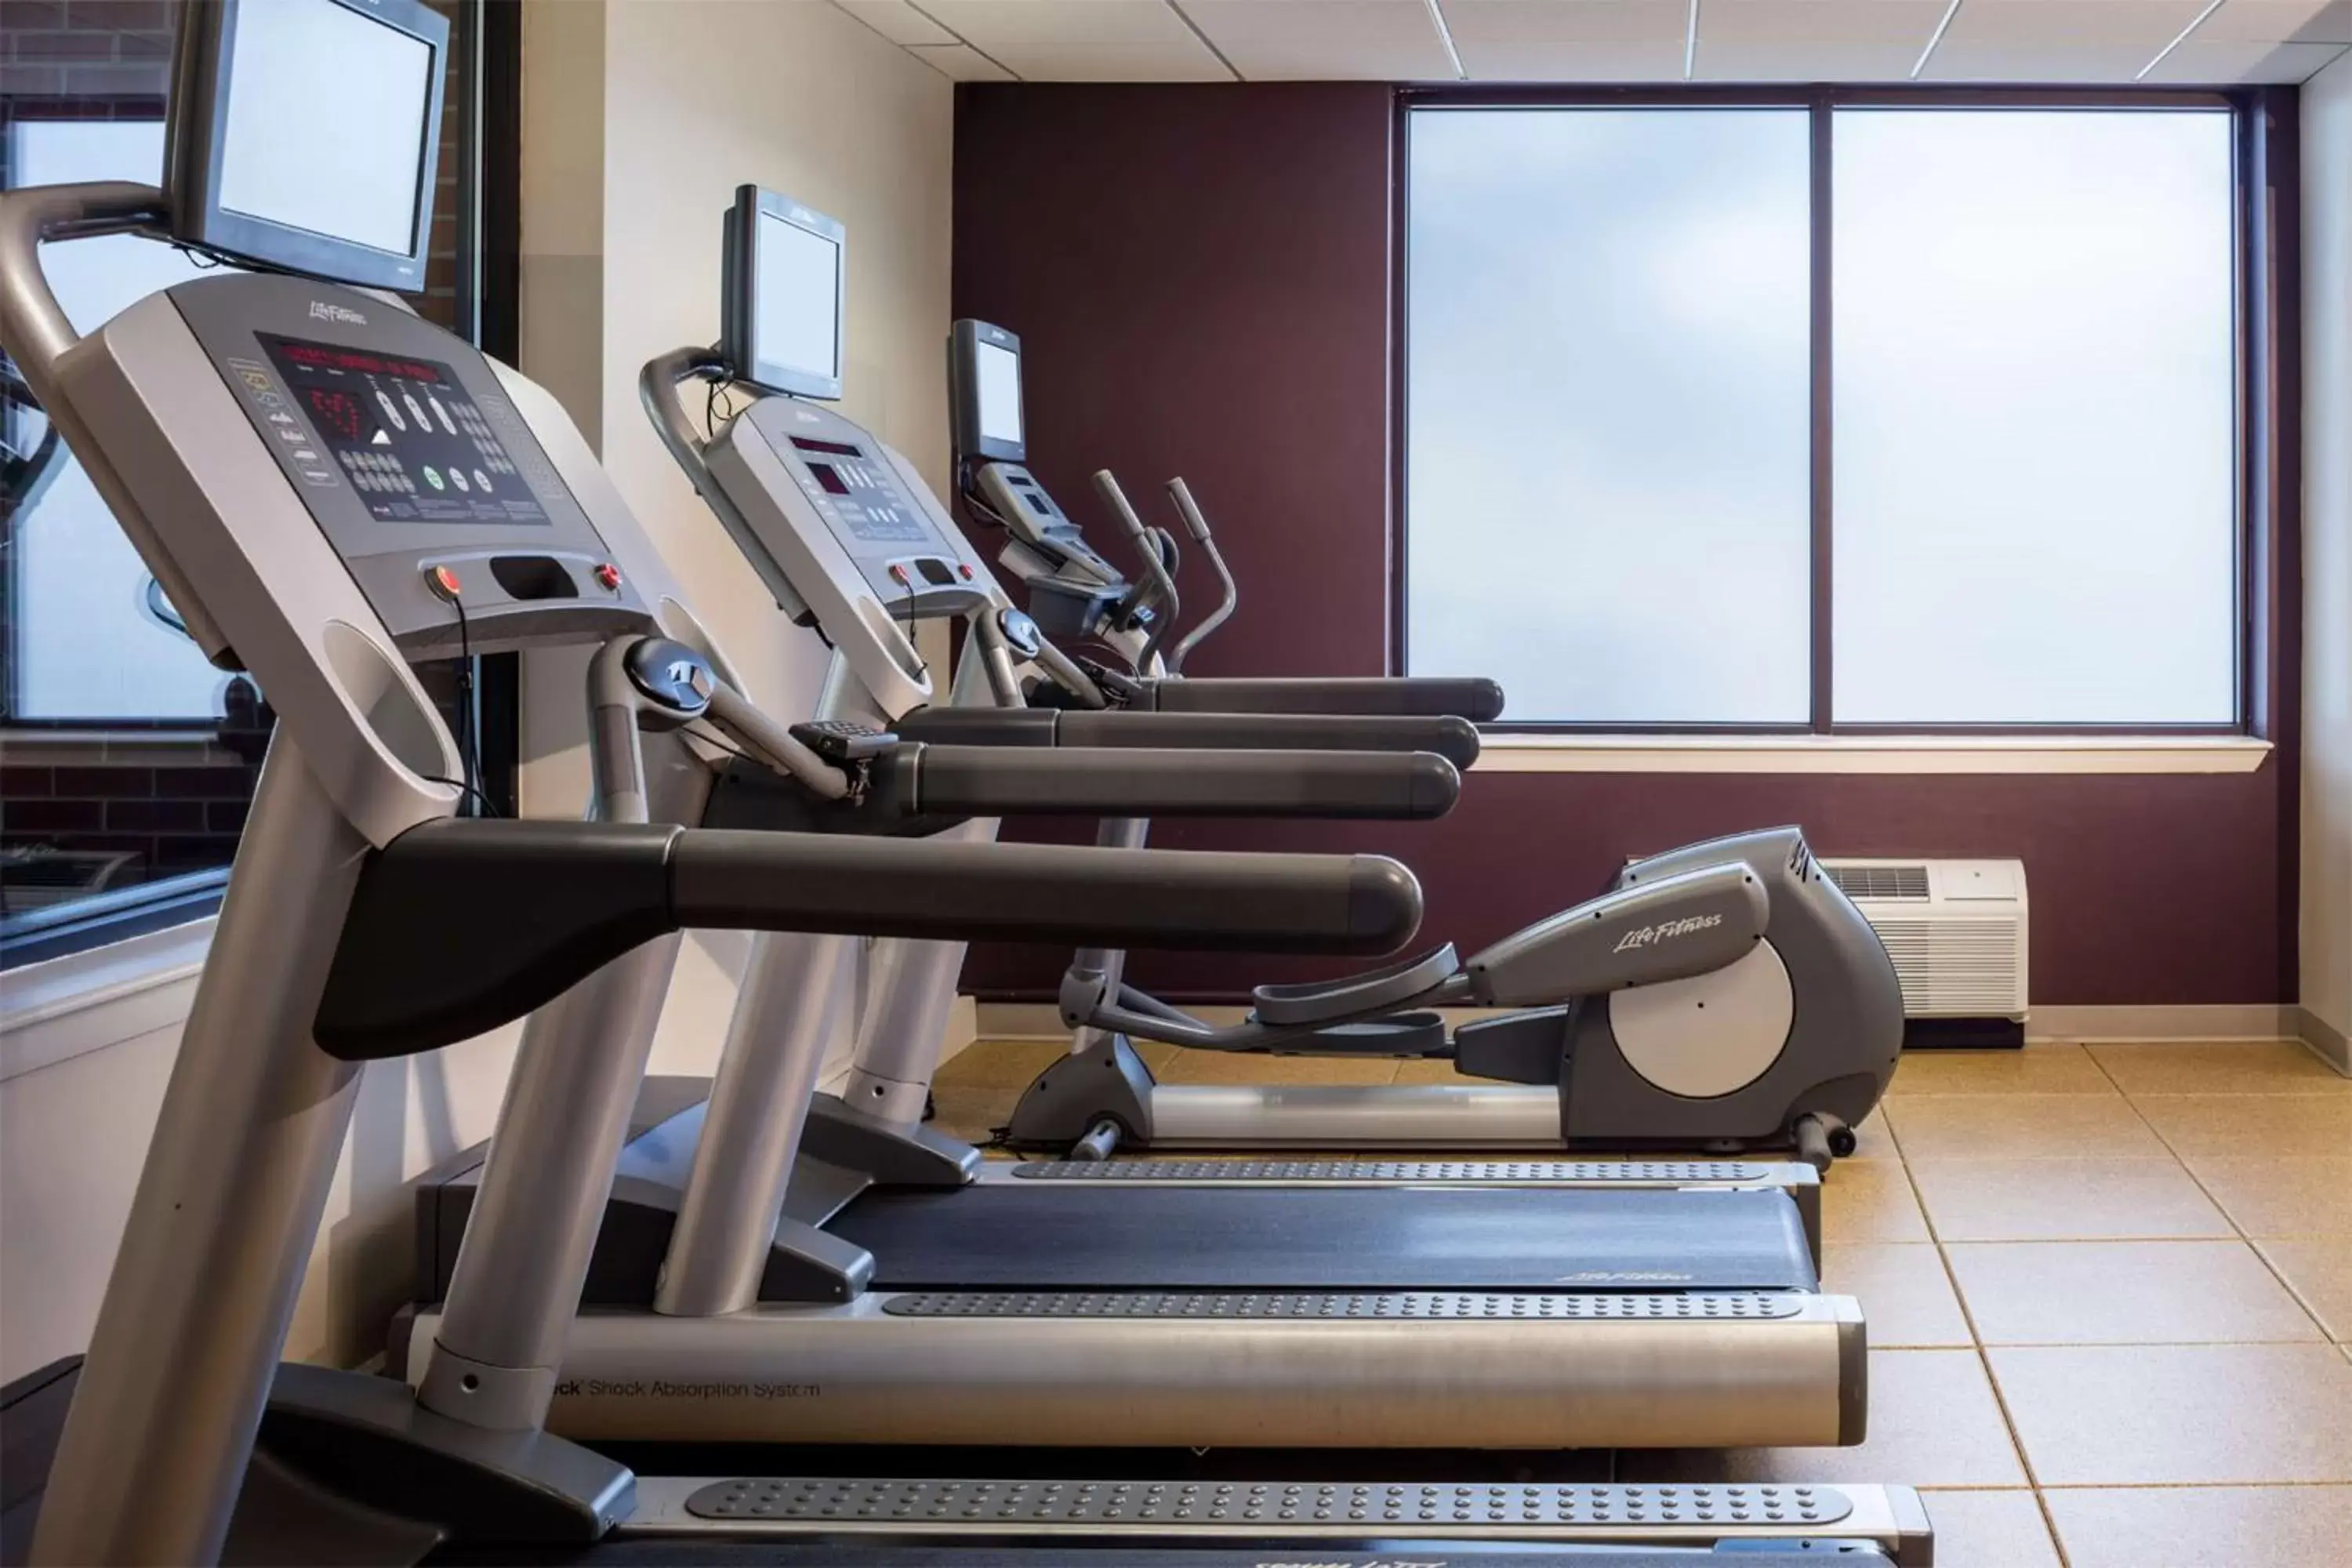 Fitness centre/facilities, Fitness Center/Facilities in Doubletree by Hilton, Leominster